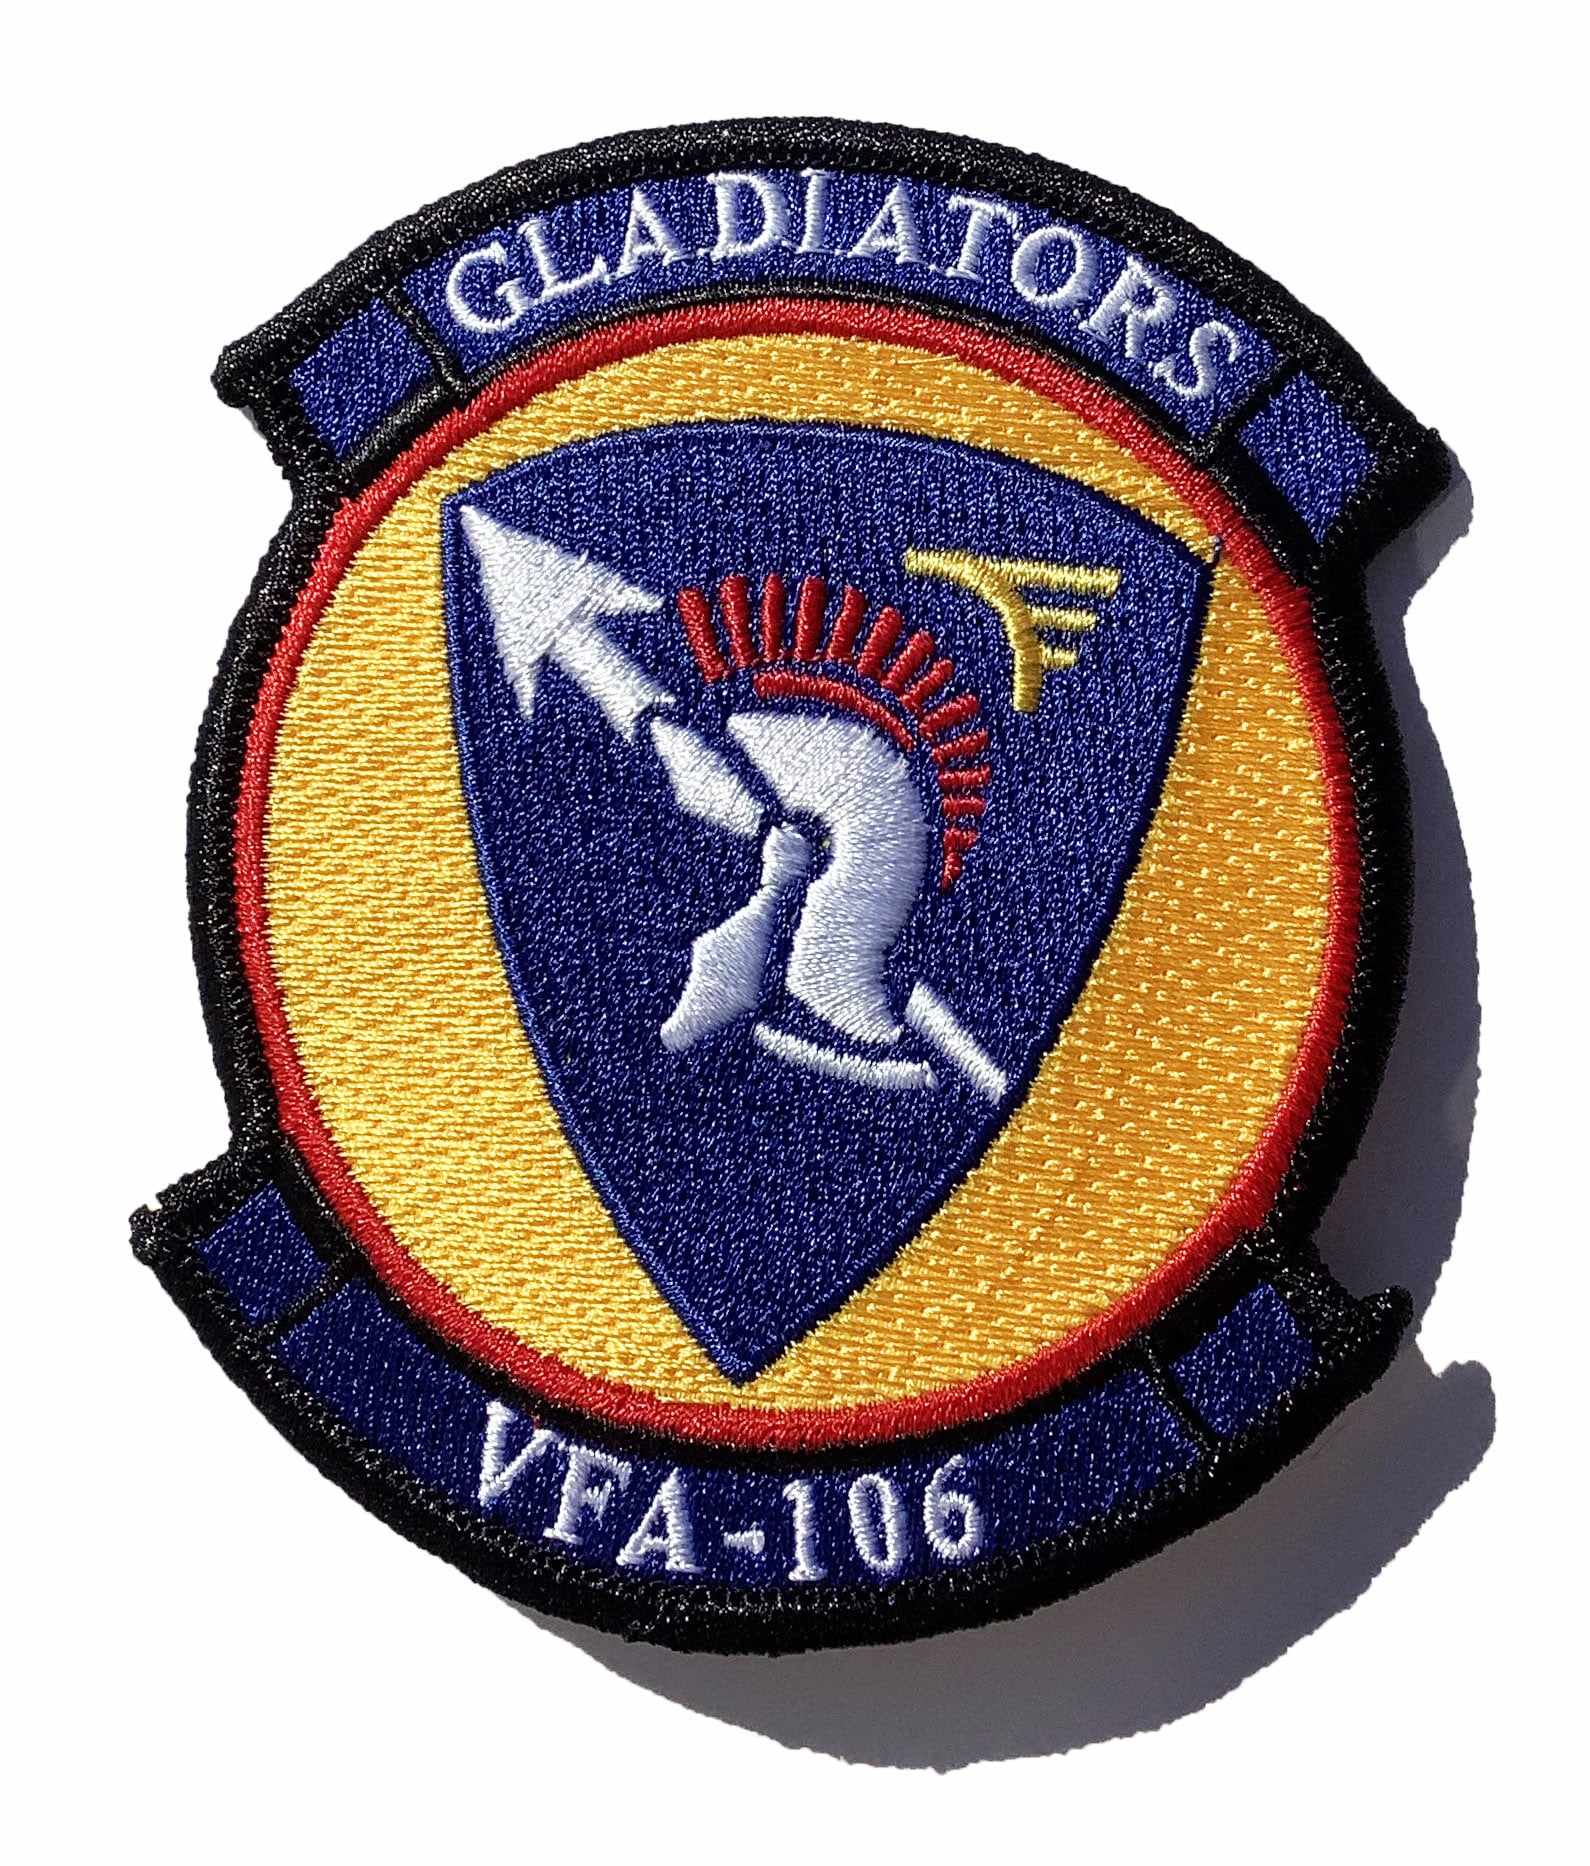 Official US Navy VFA-106 Gladiators Patch  4"